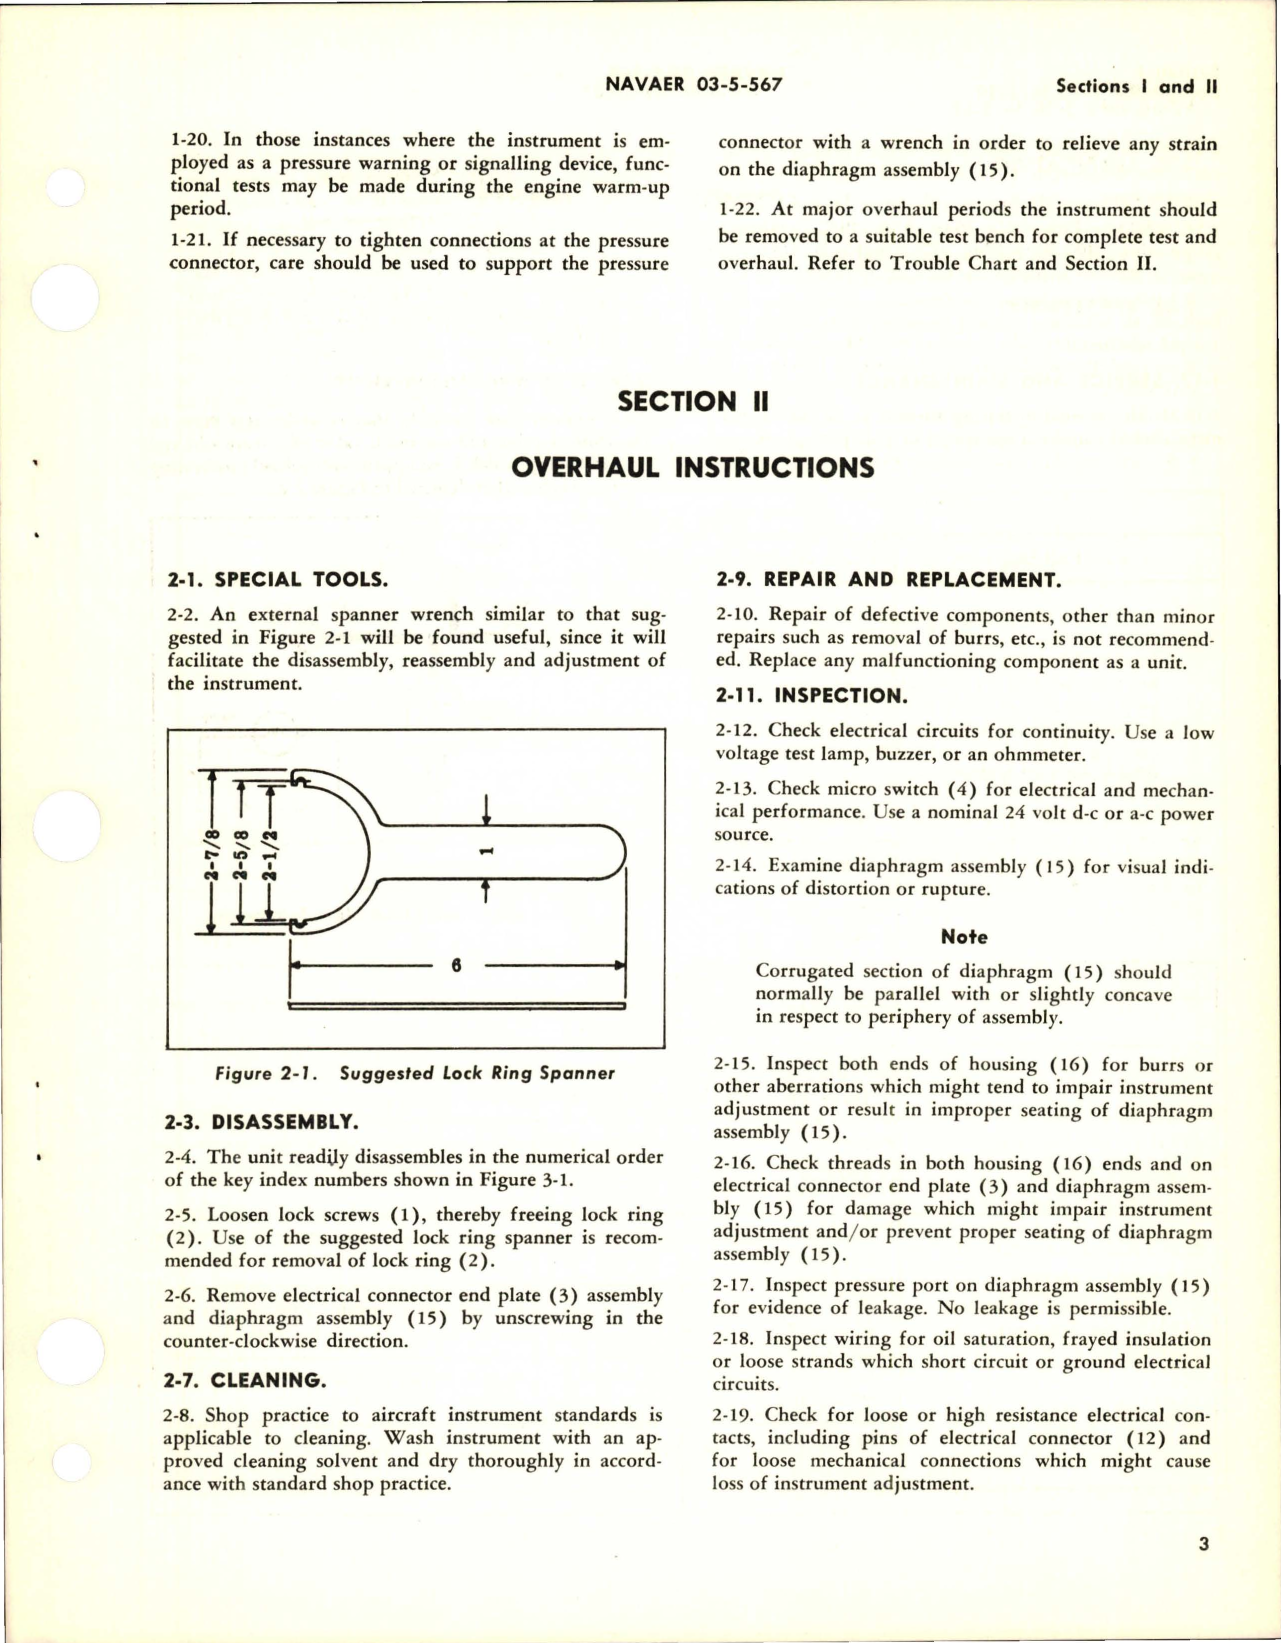 Sample page 5 from AirCorps Library document: Operation, Service and Overhaul Instructions with Parts Breakdown for Pressure Actuated Switch - Model 410-11-20 